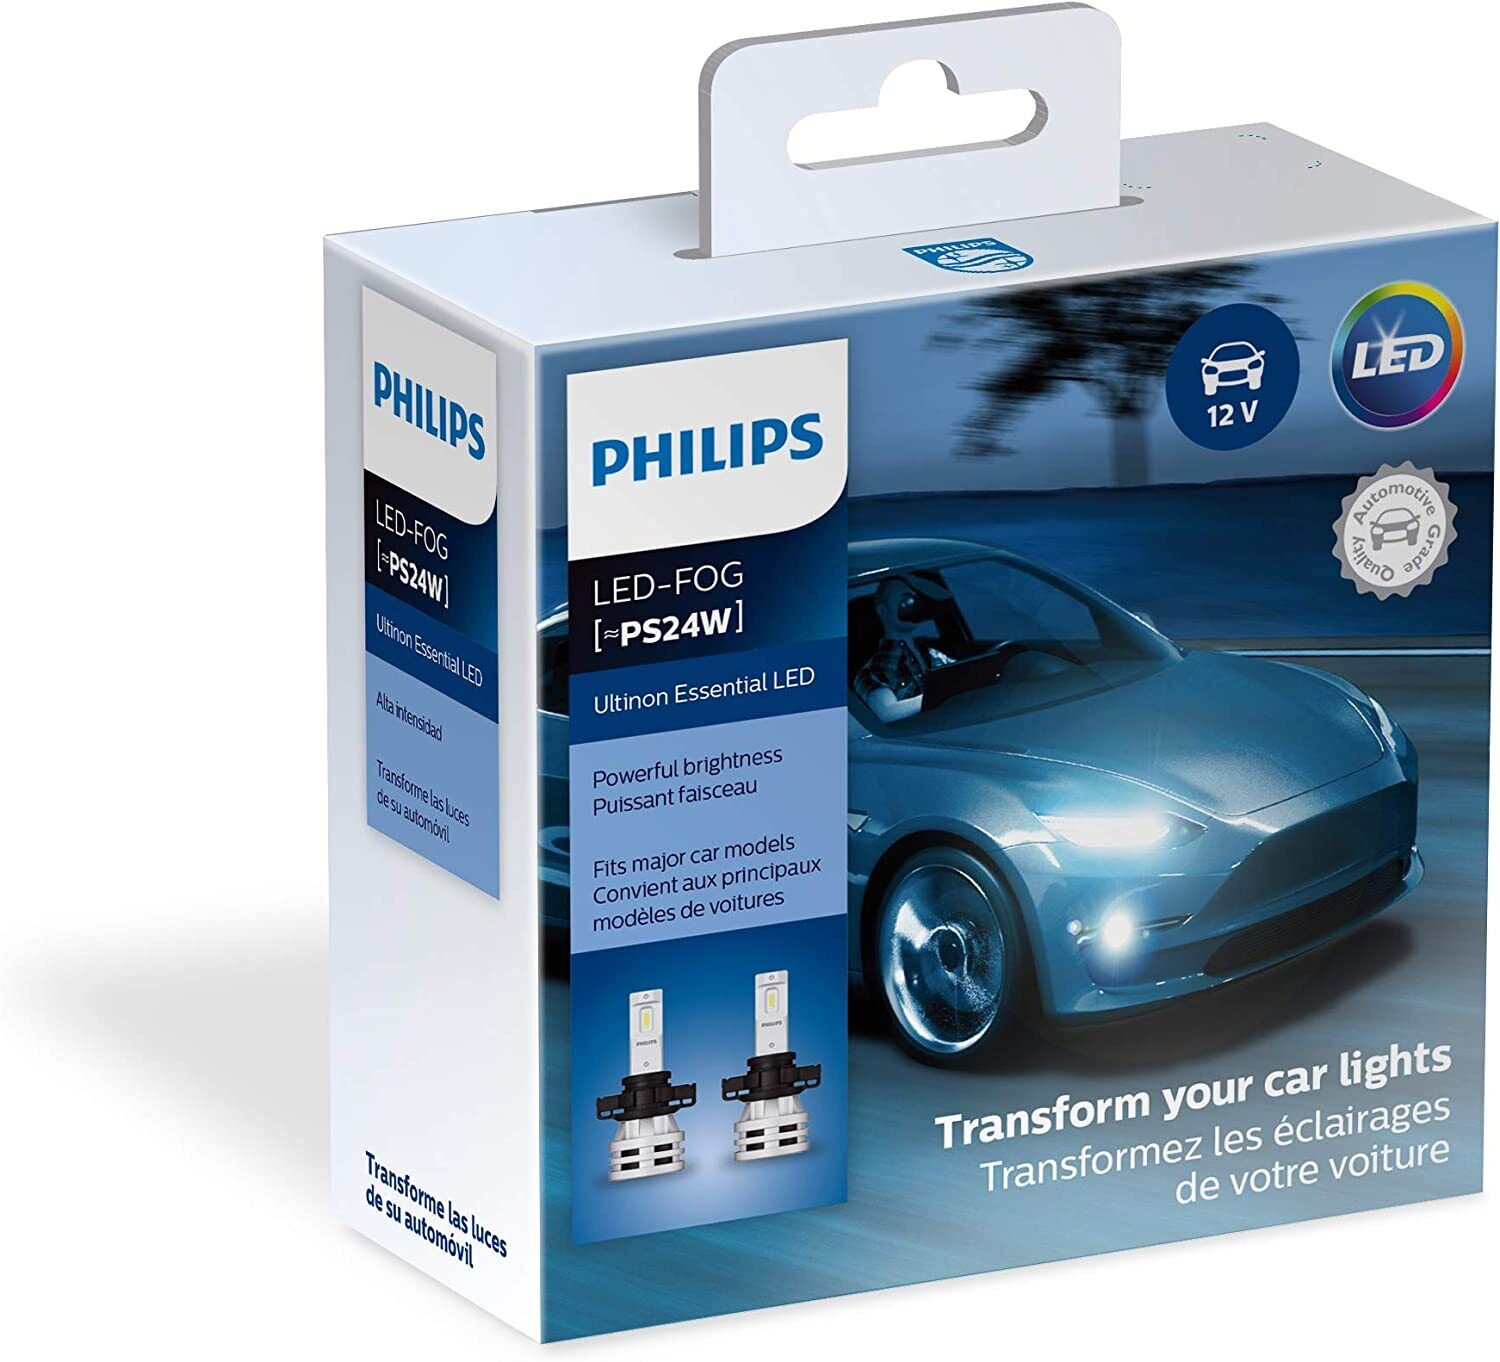 Philips Automotive Lighting PS24W Ultinon Essential LED Fog Lights, 2 Pack